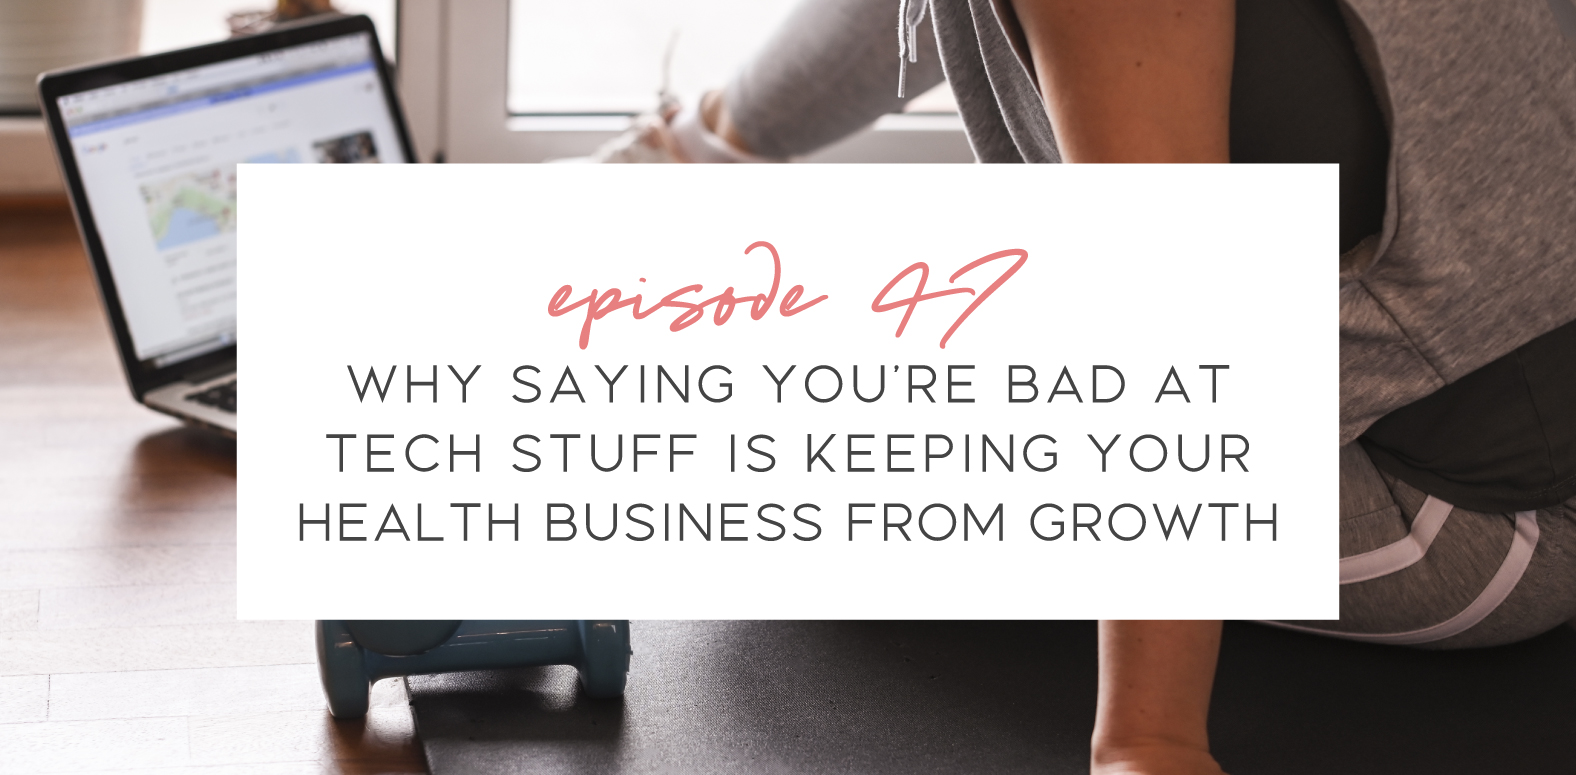 Episode 47 of the Go-To Wellness Pro Podcast. Why saying you’re bad at tech stuff is keeping your health business from growth